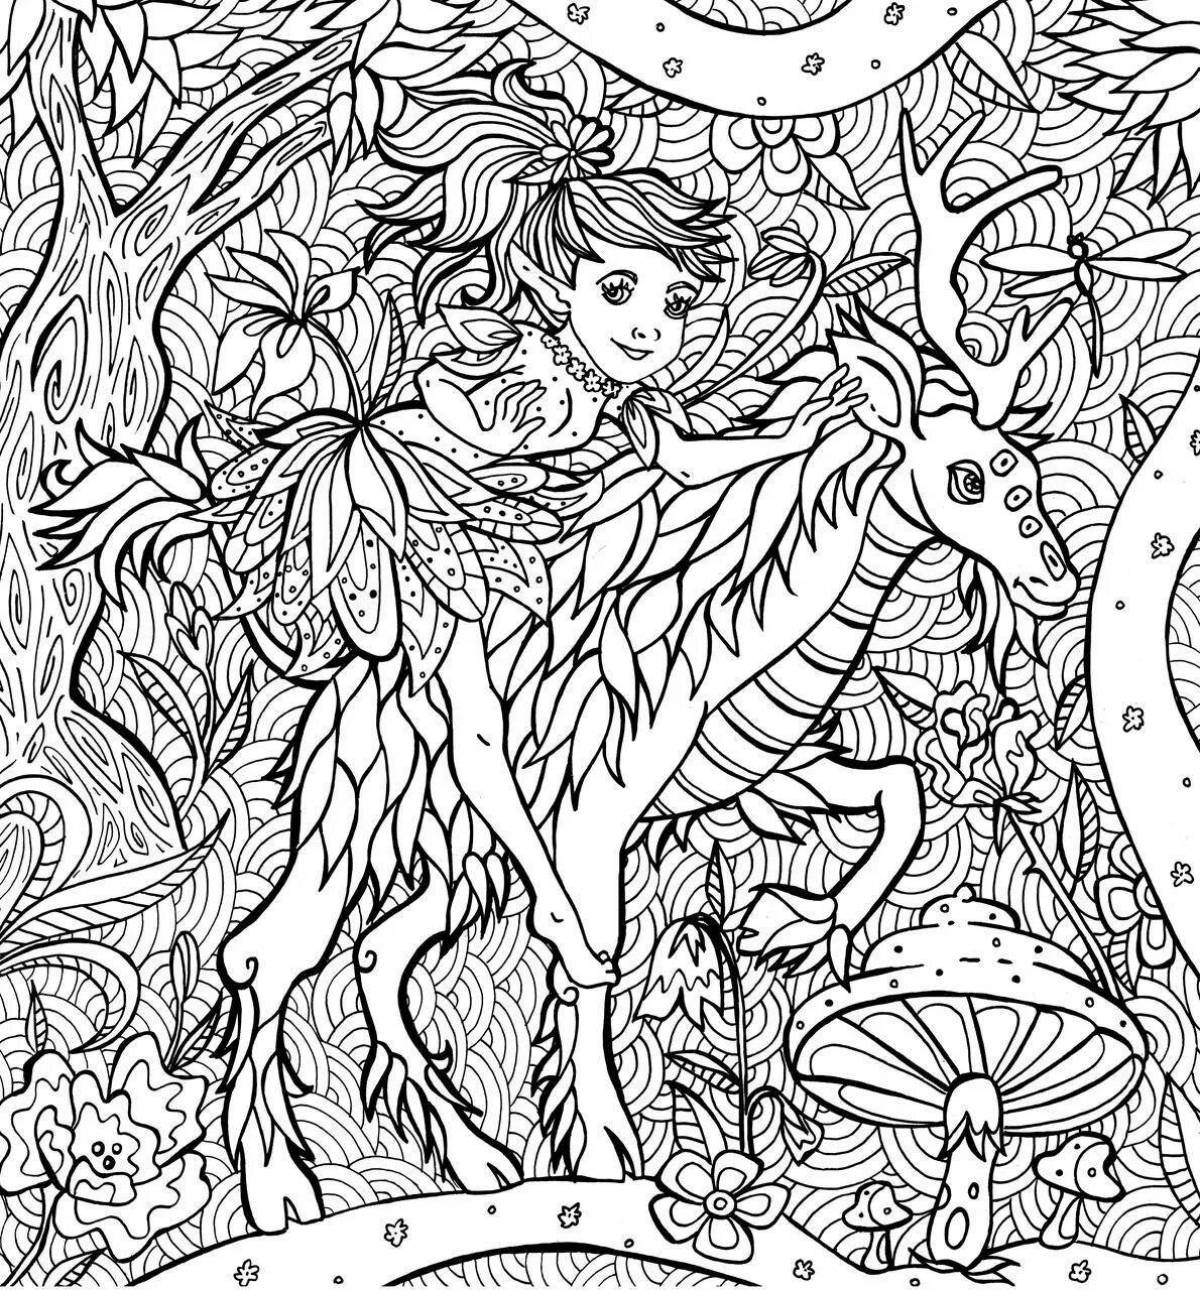 Fantastic forest coloring book